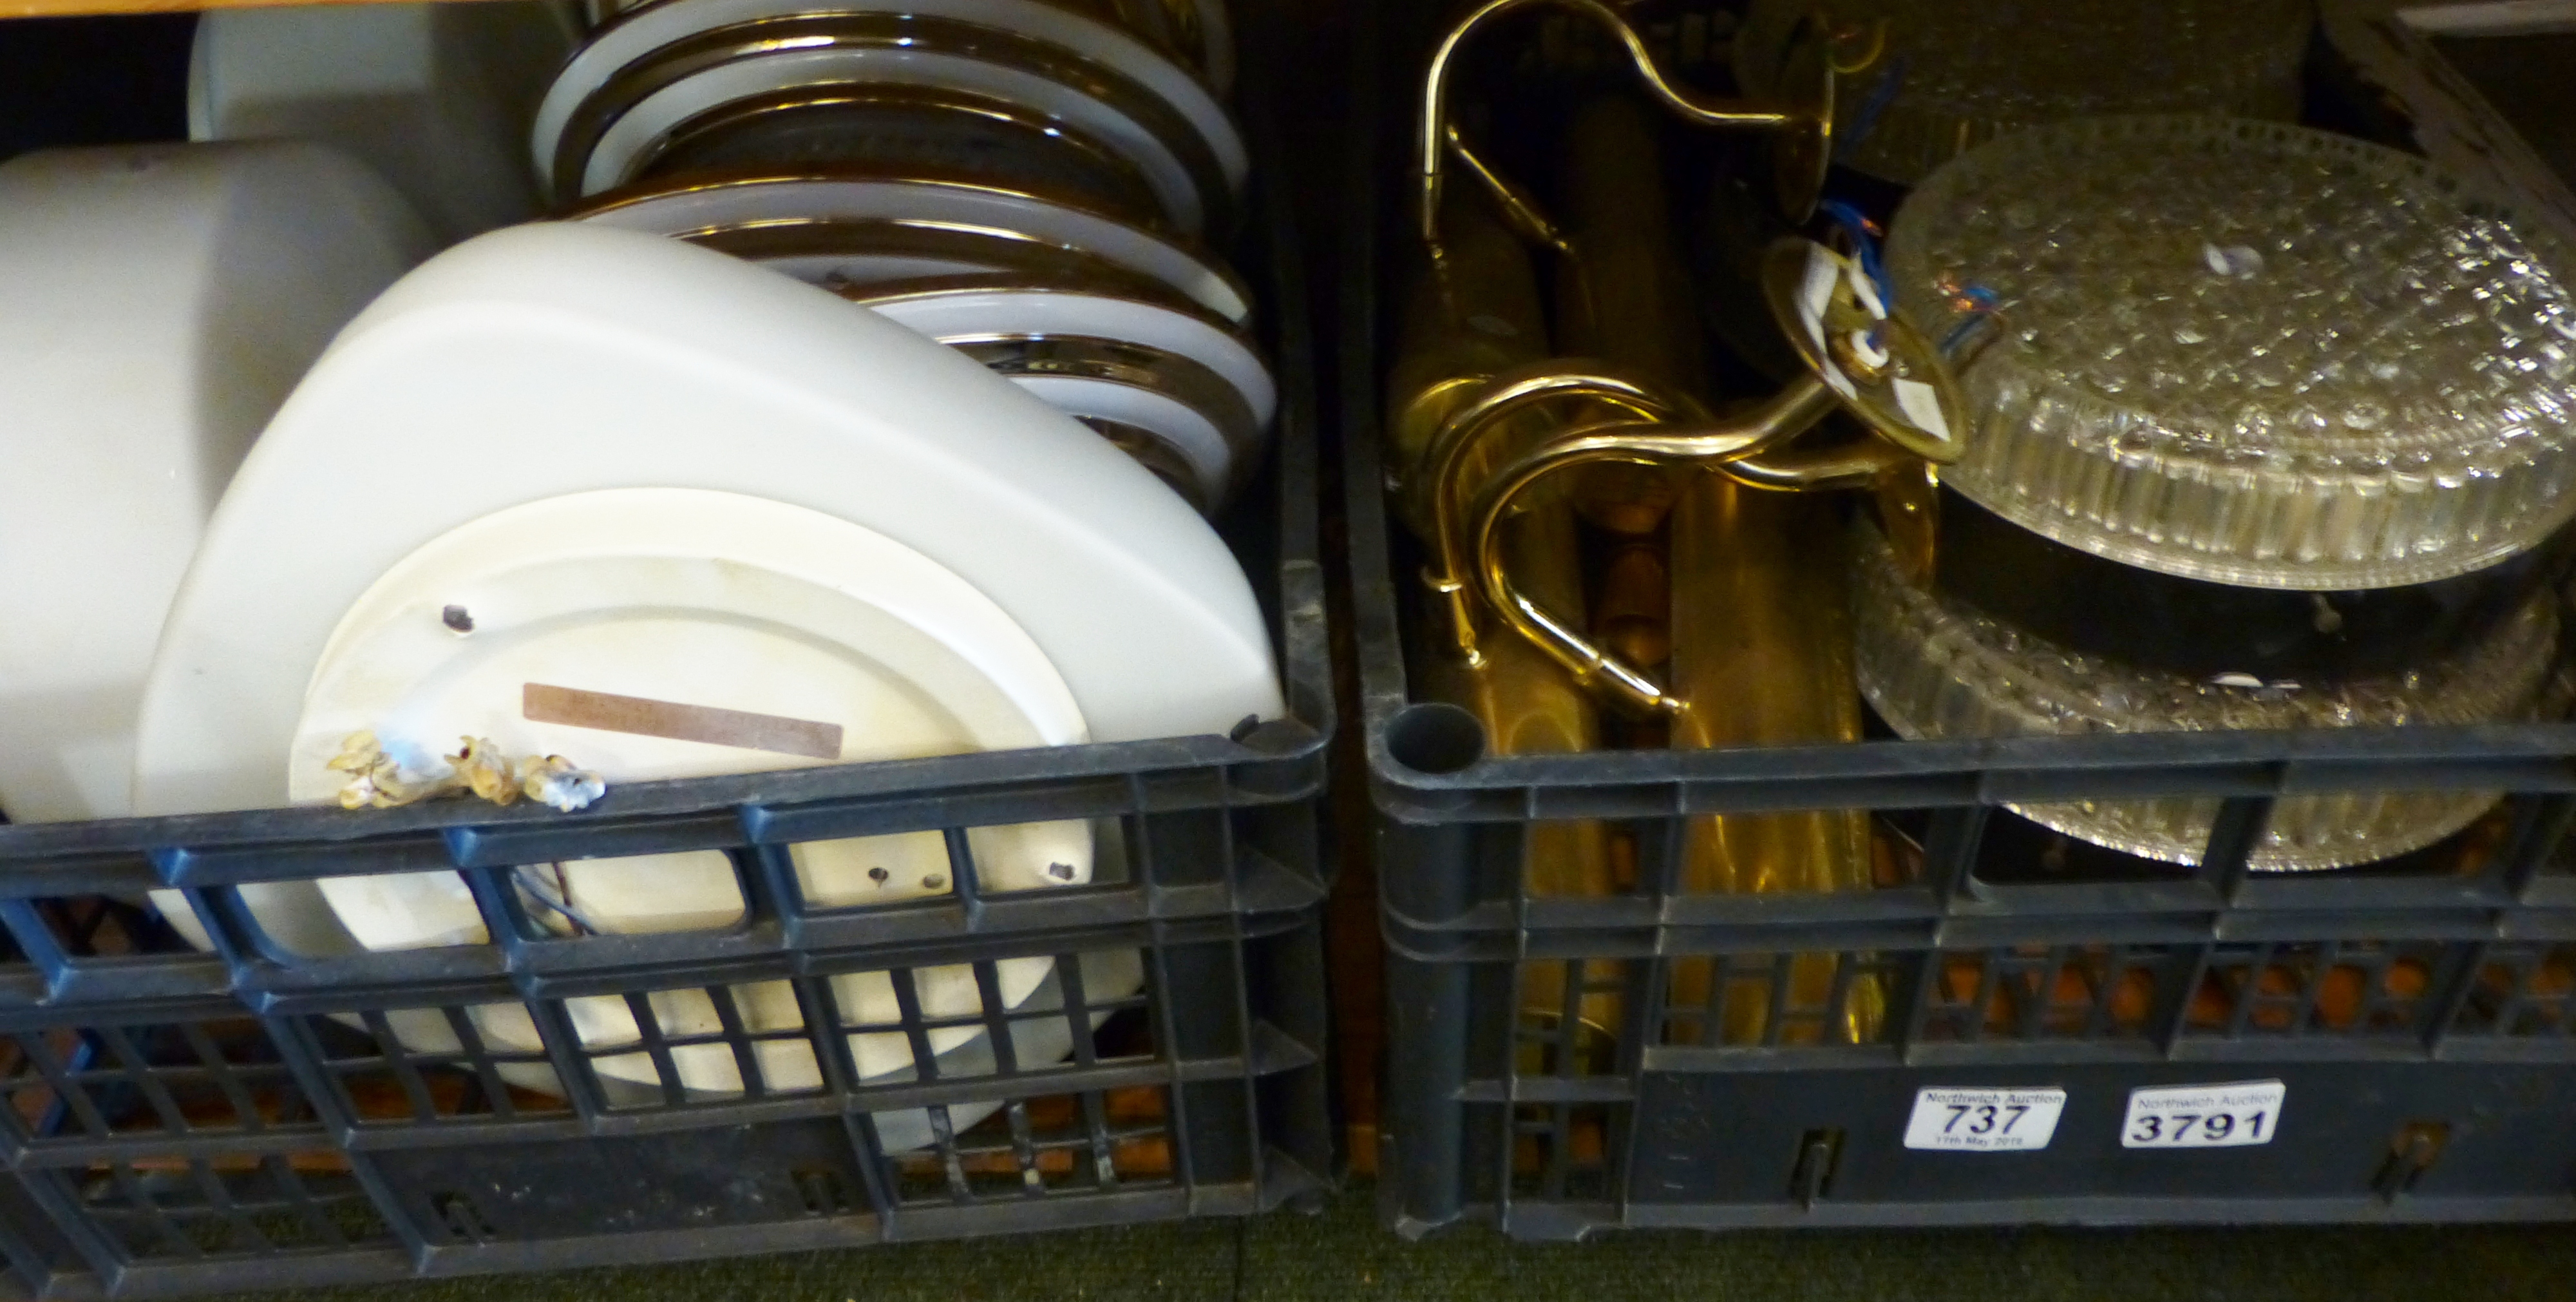 LIGHT FITTINGS. Two boxes of mixed wall light fittings